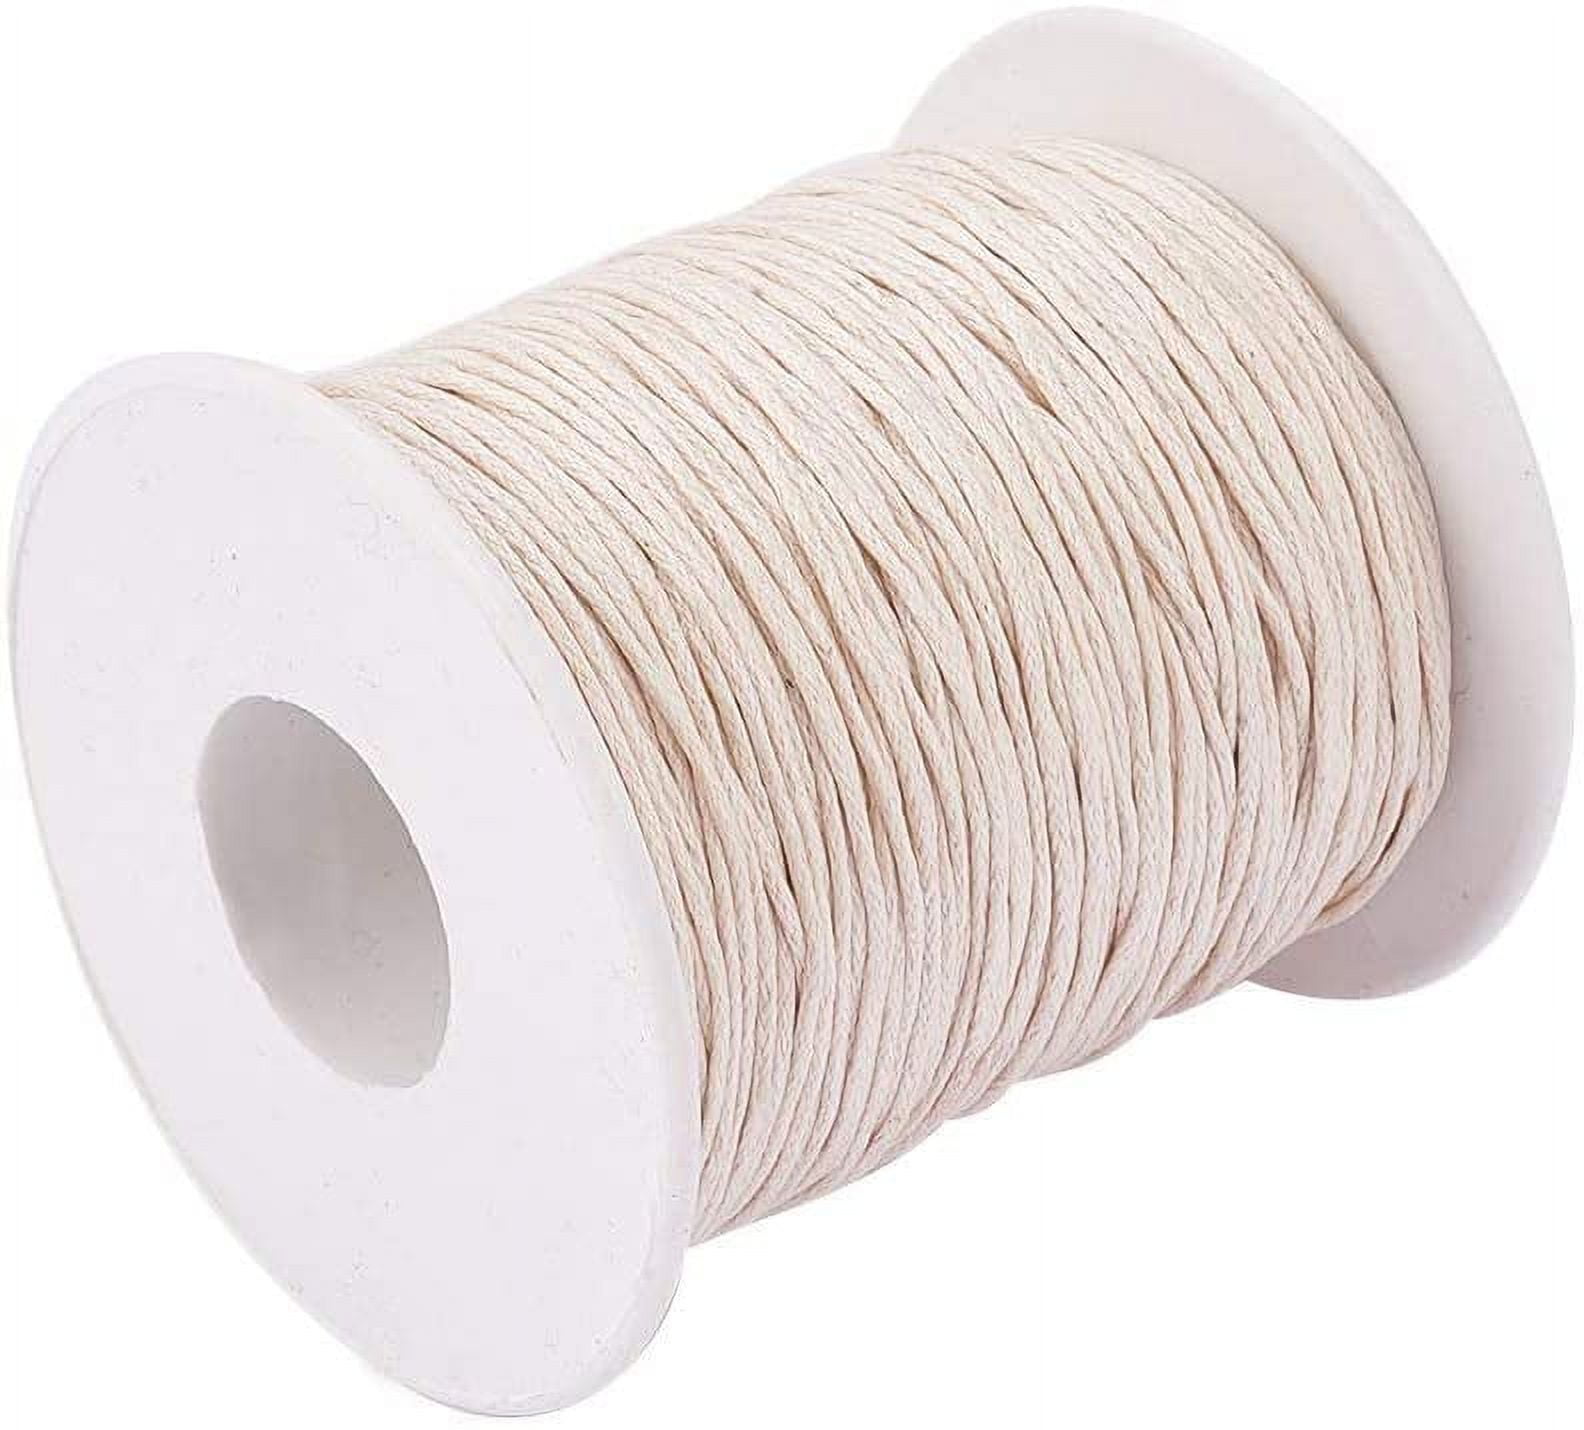 Waxed Cord For Jewellery Making